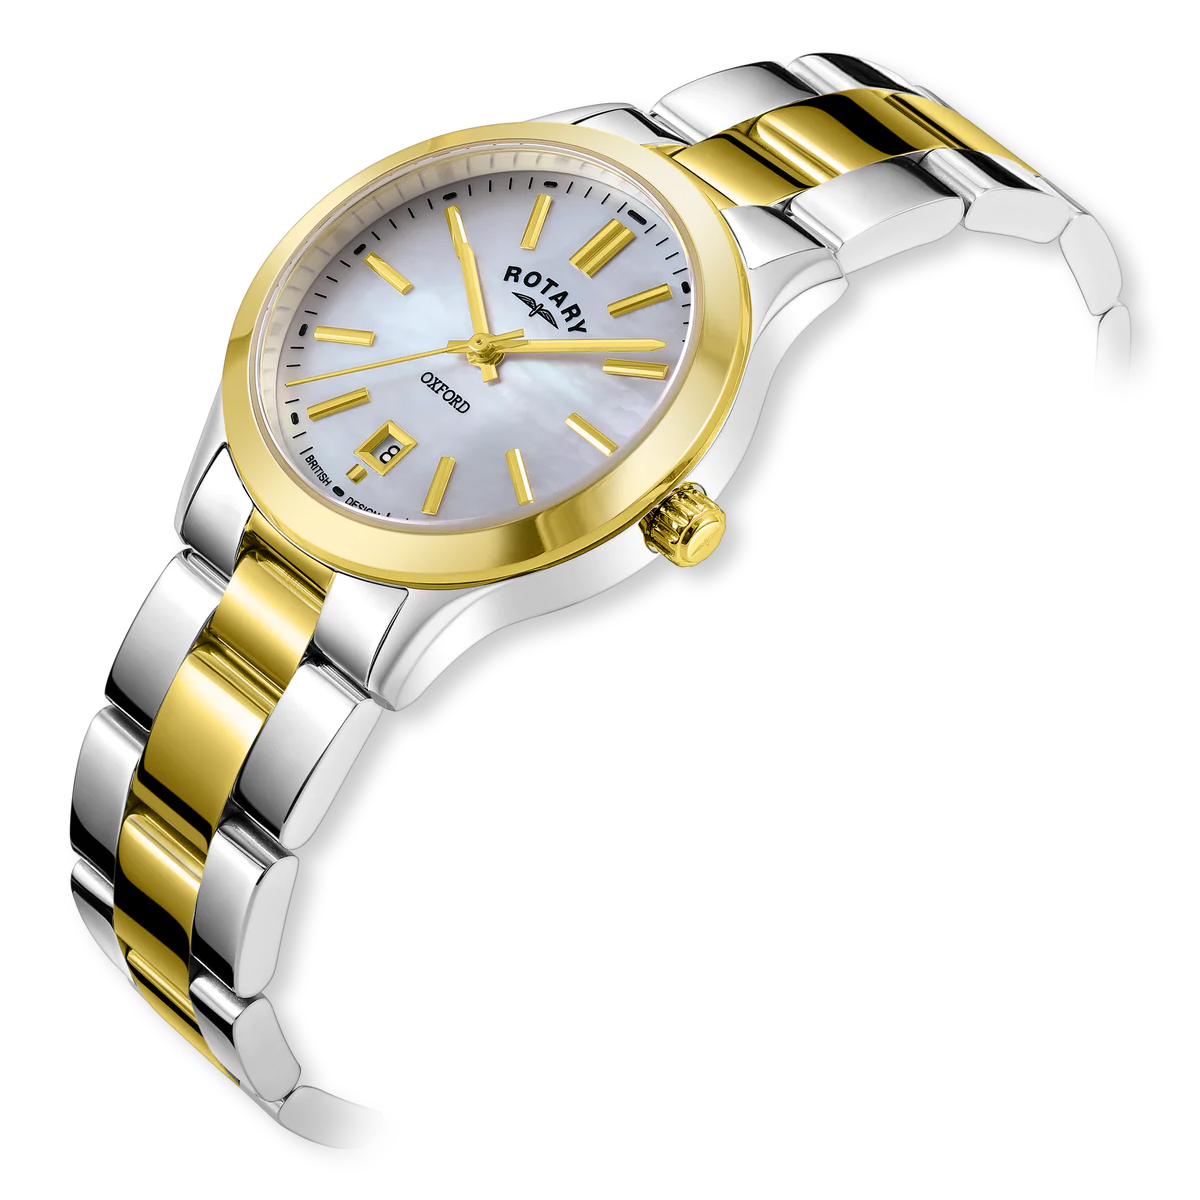 Rotary Oxford 2-Tone, Mother of Pearl Dial with Stainless Steel Bracelet - LB05521/41